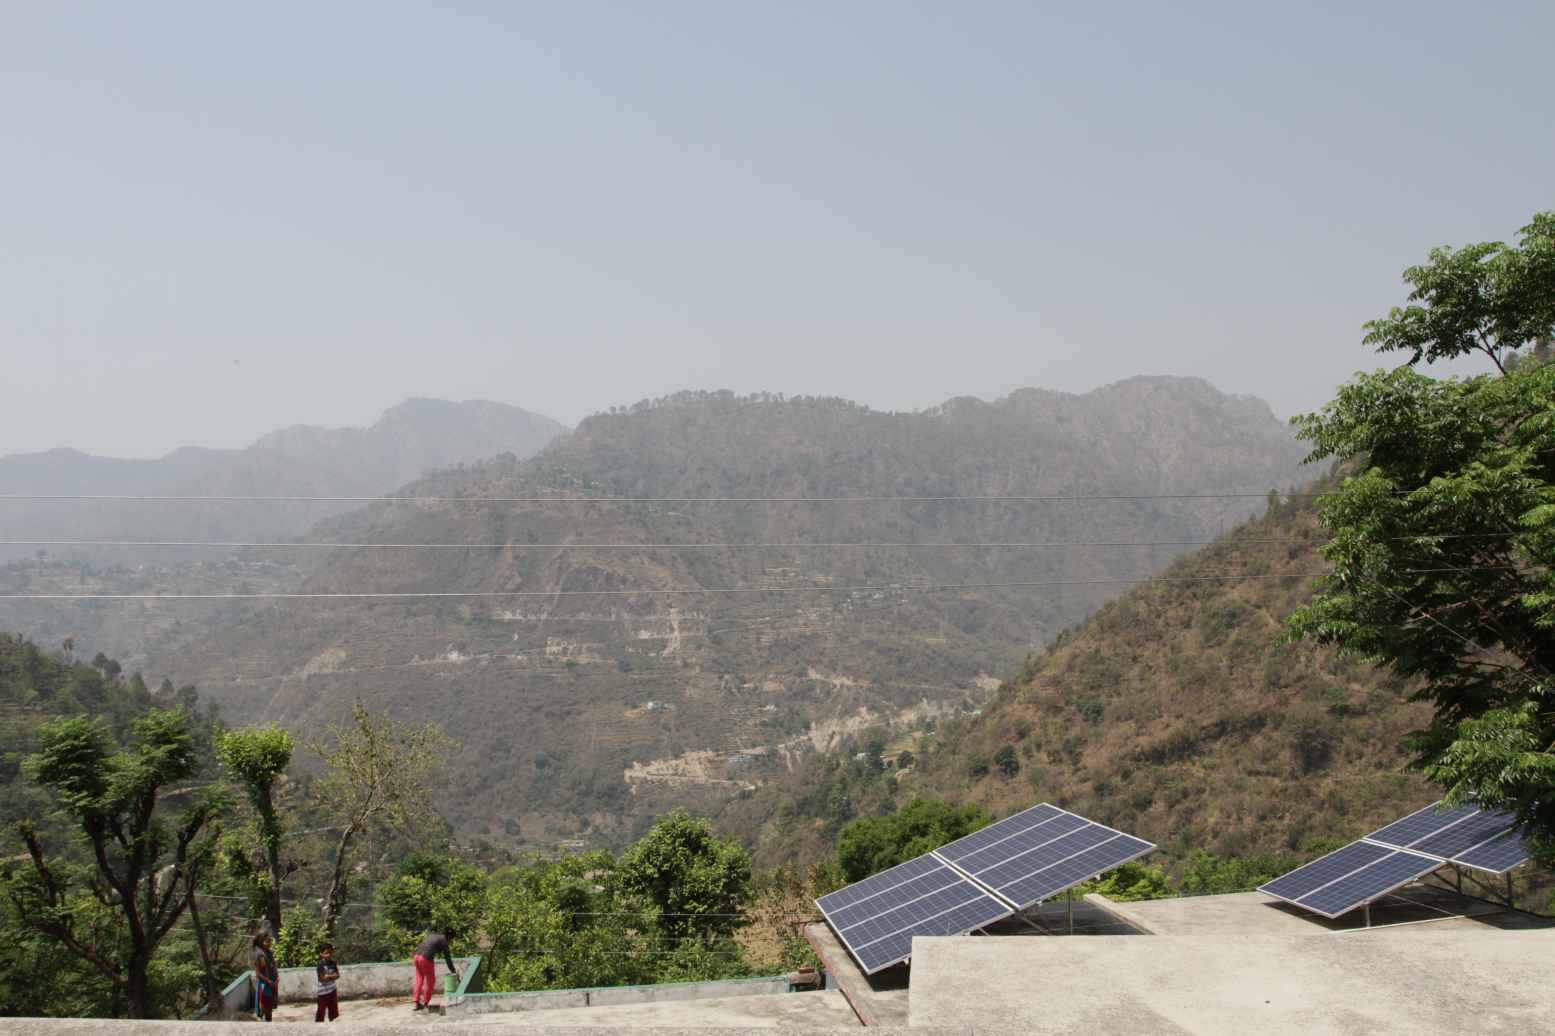 Power Farmers solar panels near Khadi overlooking hills with people standing near by- self-employment